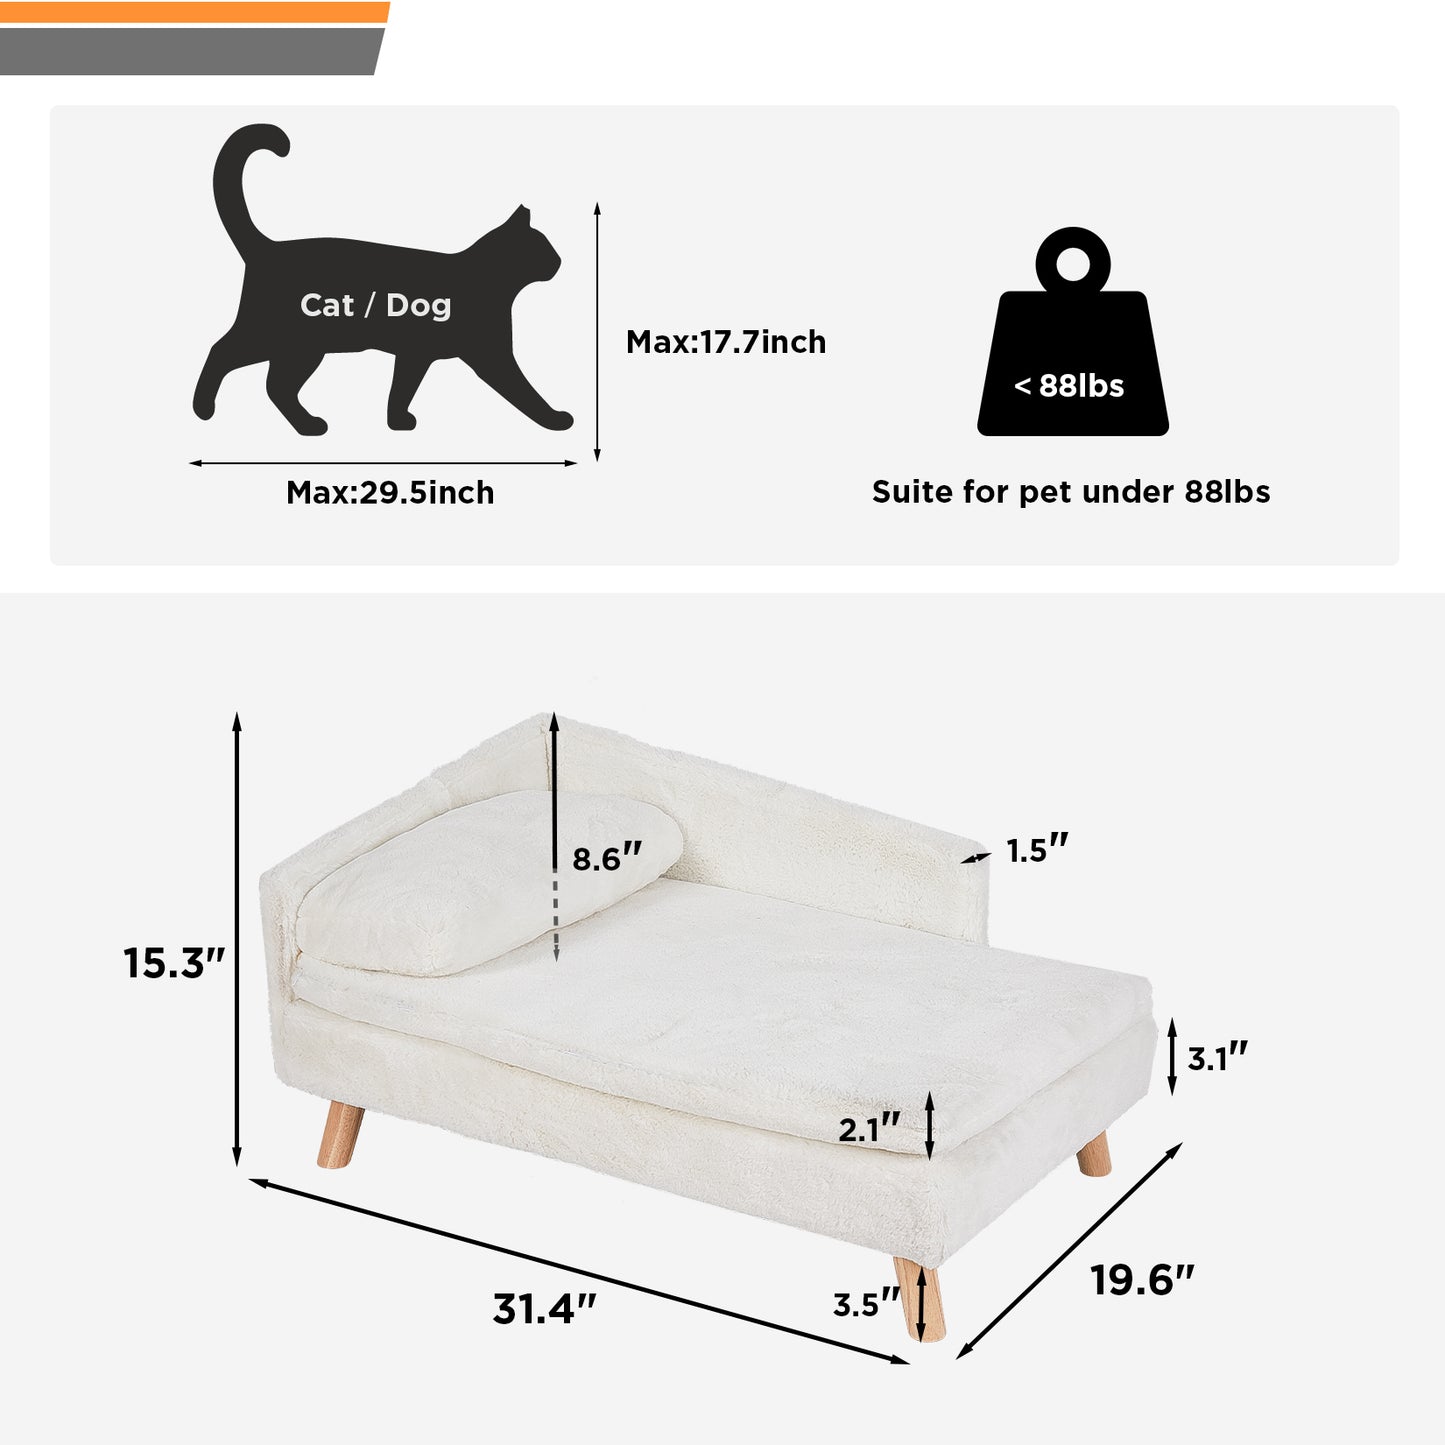 Minimalist look and beige color adorn your home decor while fits any dogs cats breed. Soft linter fabric for keeping your four-legged friends away from cold winter days, a nice sleep night.